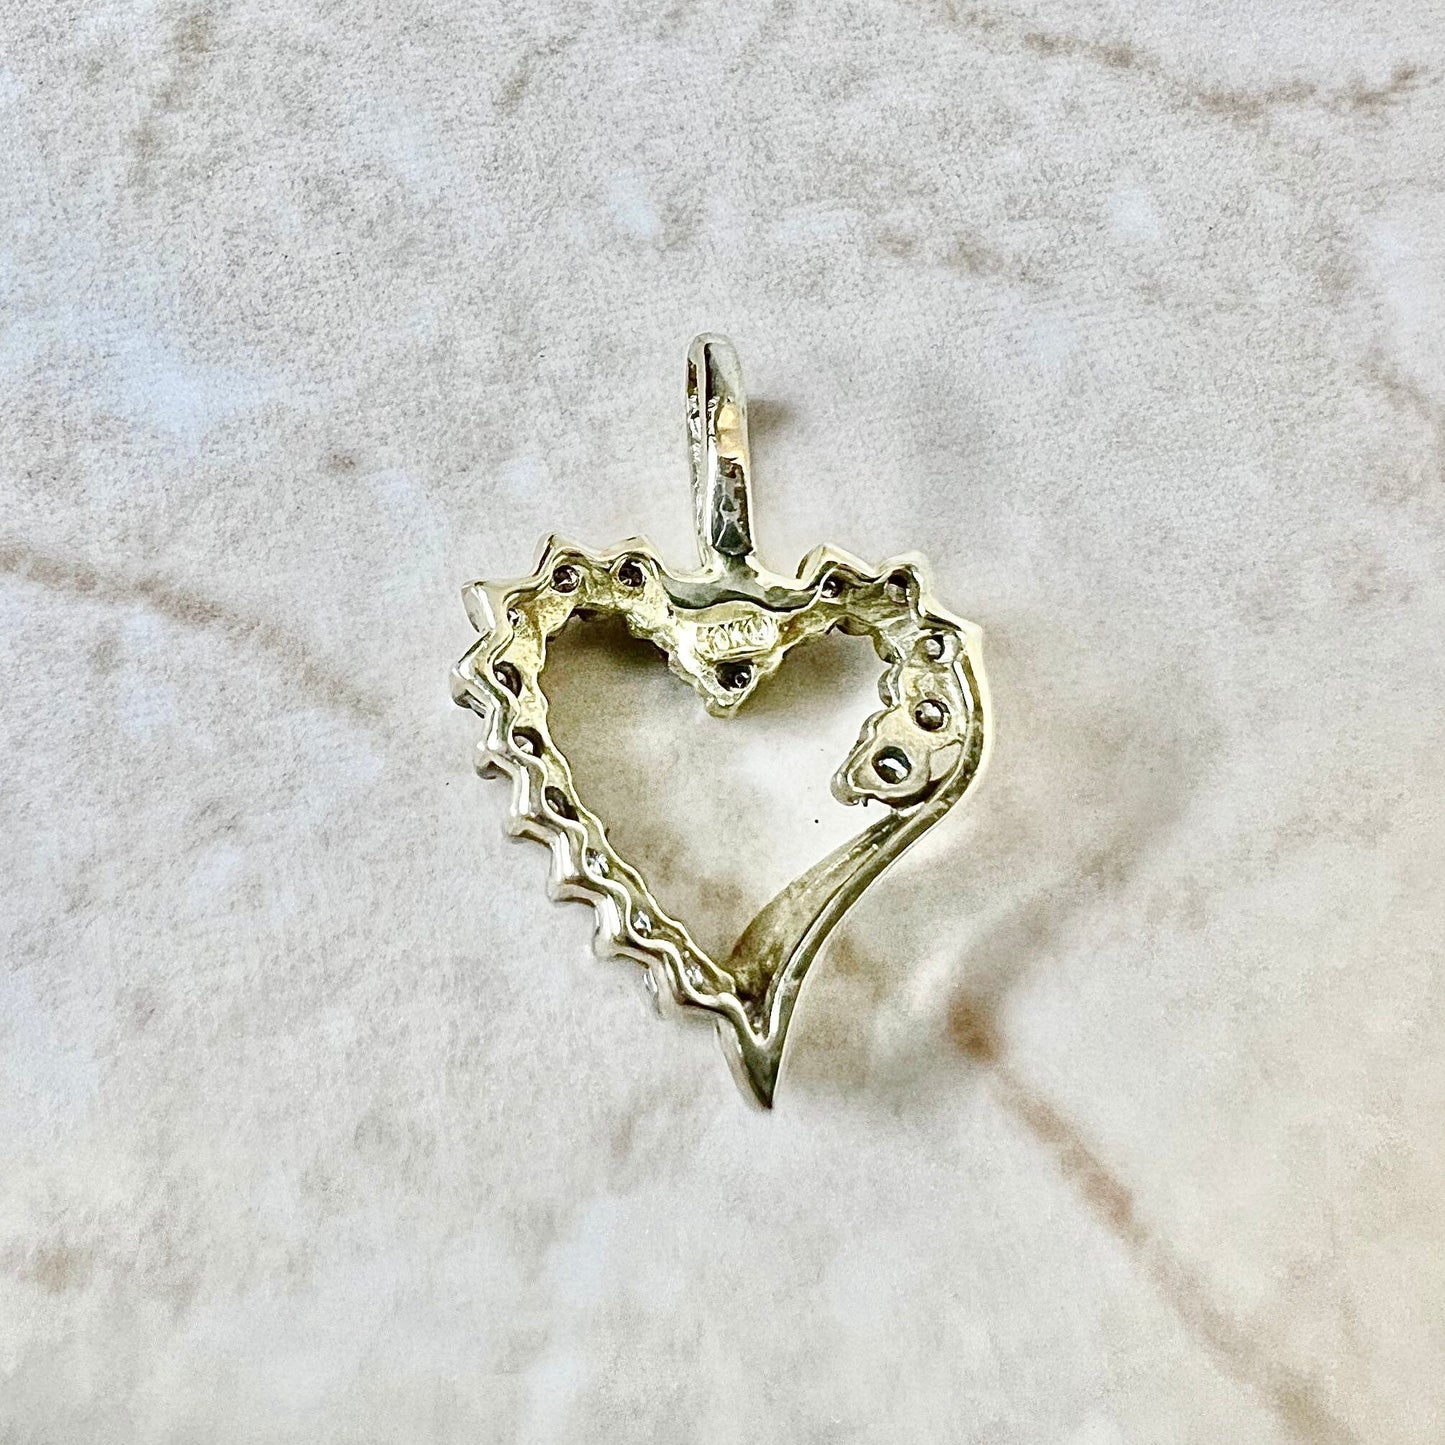 10K Diamond Heart Pendant Necklace - Yellow Gold Diamond Pendant - Gold Heart Necklace - Birthday Gift - Valentine’s Day Gift For Her